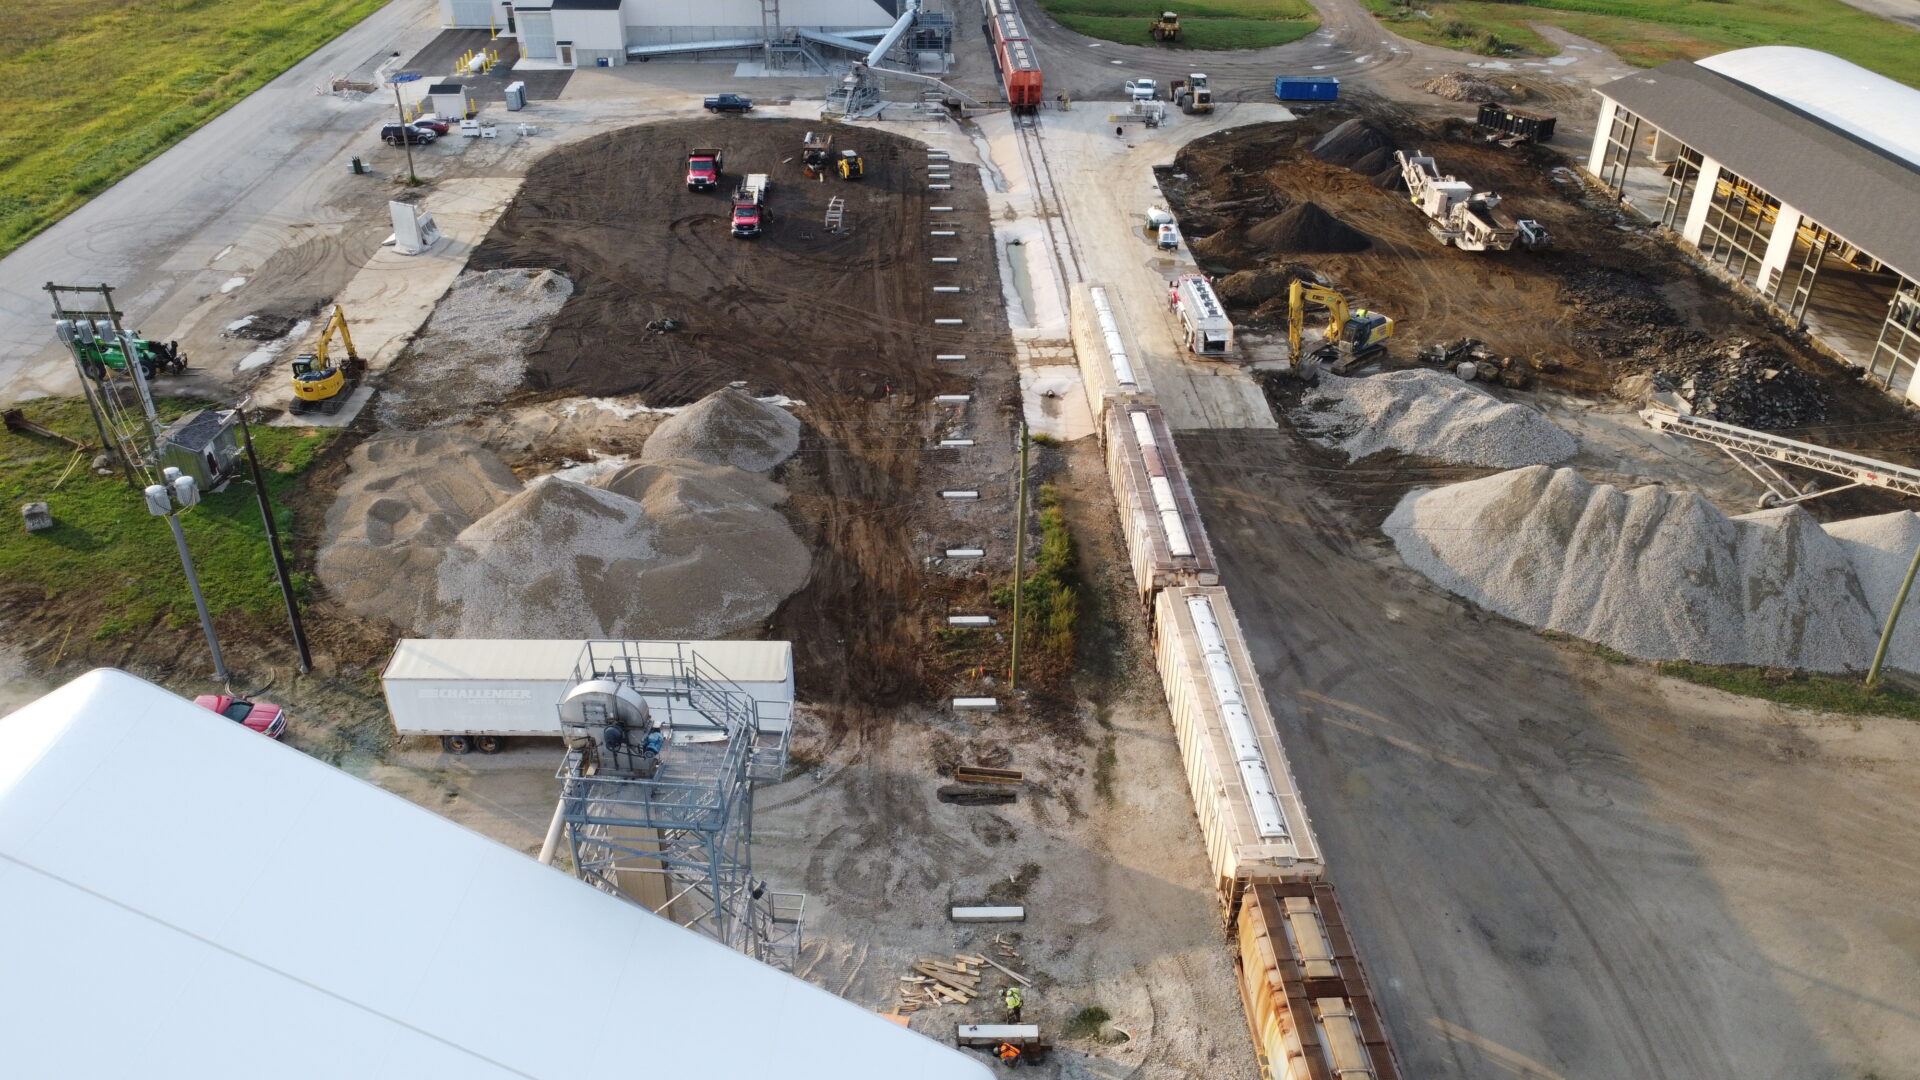 Aerial view of industrial construction site with heavy machinery.